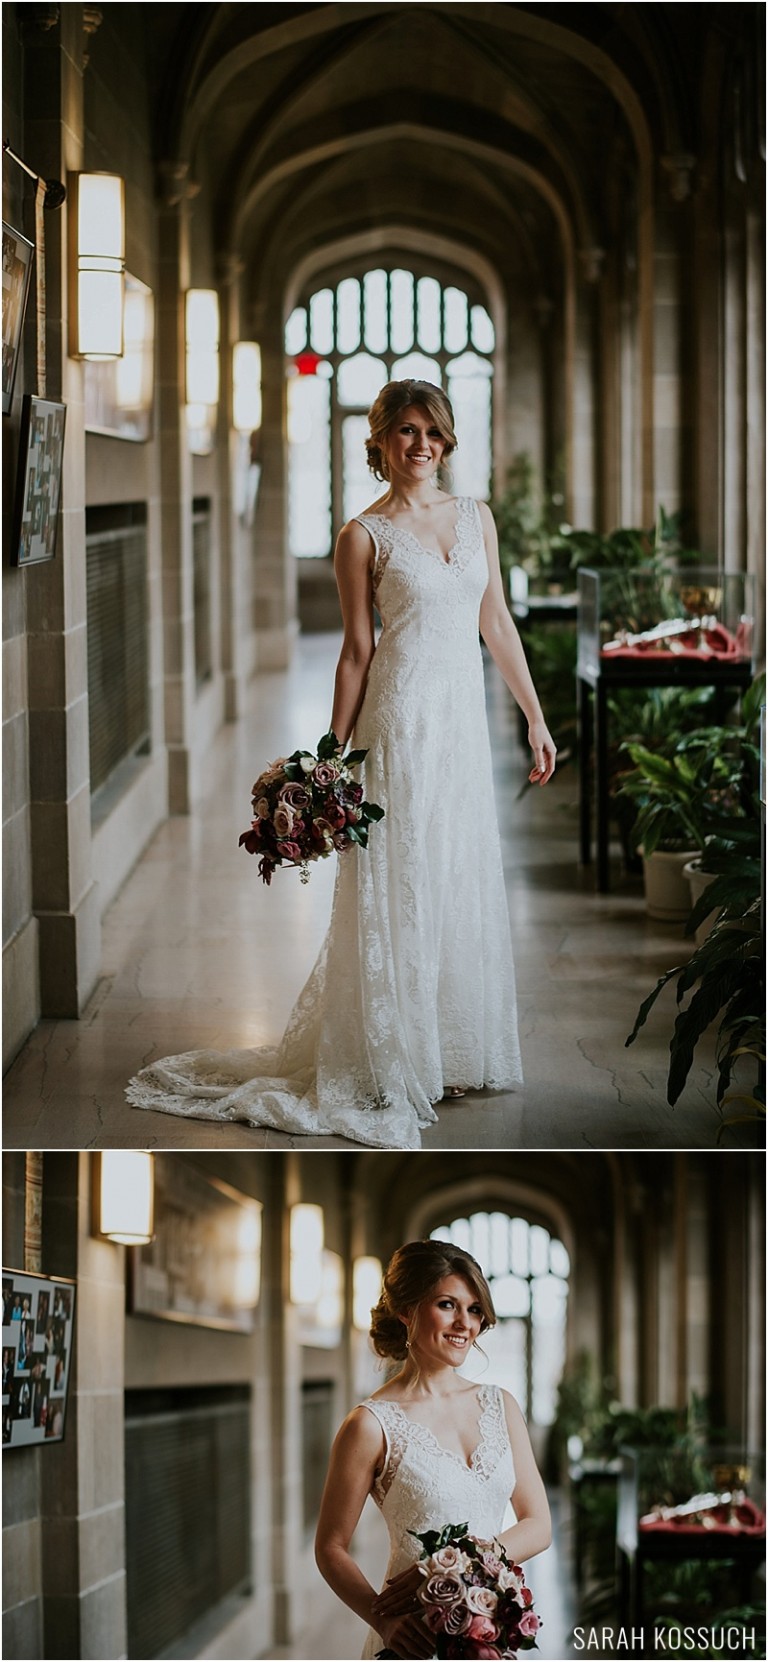 Lovett Hall at The Henry Ford Museum Michigan Wedding Photography 1075 | Sarah Kossuch Photography